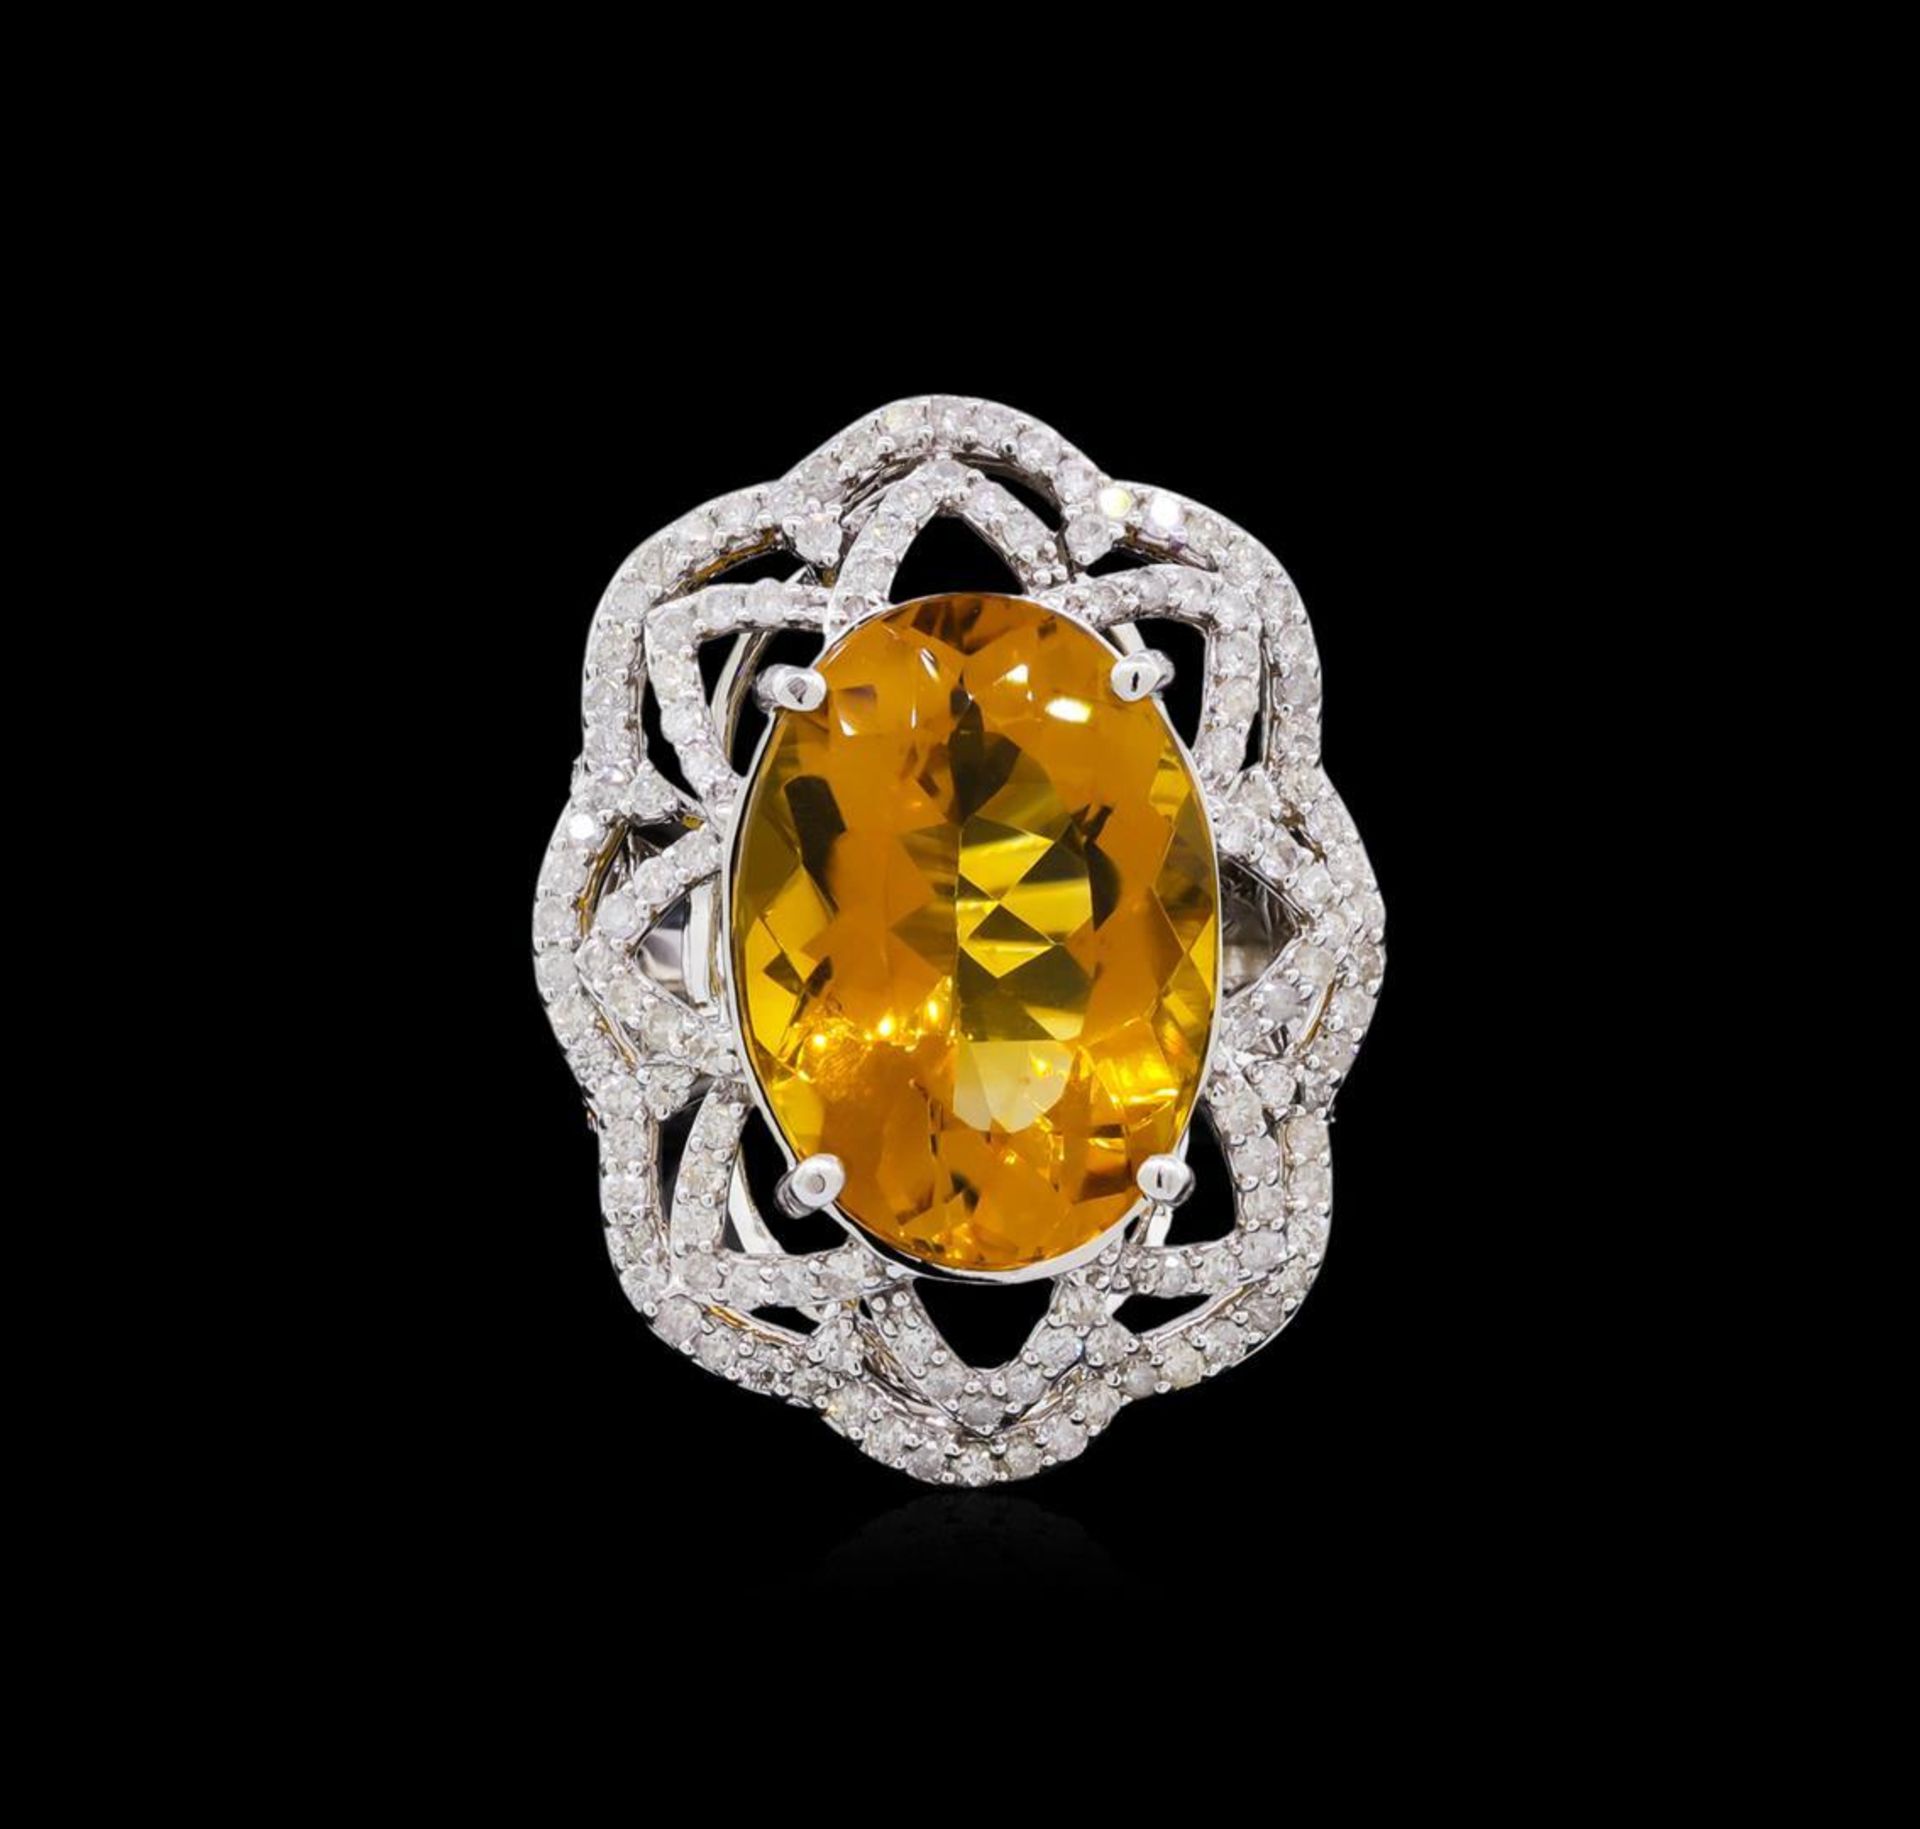 14KT White Gold 10.91 ctw Citrine and Diamond Ring - Image 2 of 5